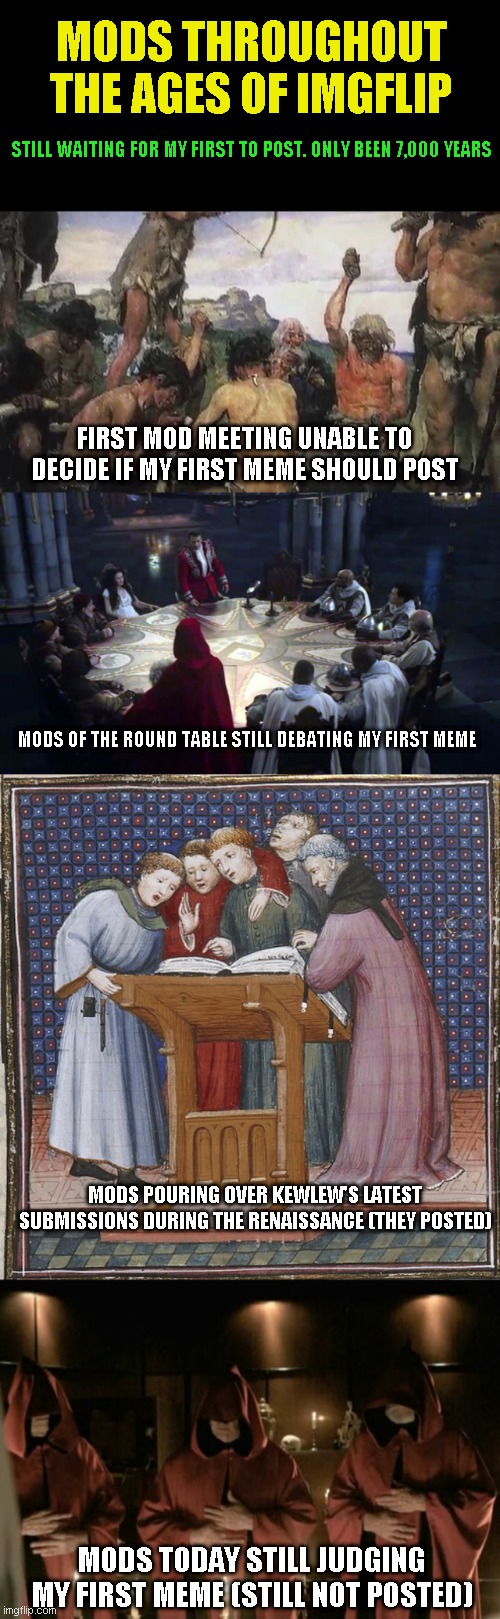 In their defense it was just a fart in school joke | MODS THROUGHOUT THE AGES OF IMGFLIP; STILL WAITING FOR MY FIRST TO POST. ONLY BEEN 7,000 YEARS; FIRST MOD MEETING UNABLE TO DECIDE IF MY FIRST MEME SHOULD POST; MODS OF THE ROUND TABLE STILL DEBATING MY FIRST MEME; MODS POURING OVER KEWLEW'S LATEST SUBMISSIONS DURING THE RENAISSANCE (THEY POSTED); MODS TODAY STILL JUDGING MY FIRST MEME (STILL NOT POSTED) | image tagged in just a joke | made w/ Imgflip meme maker